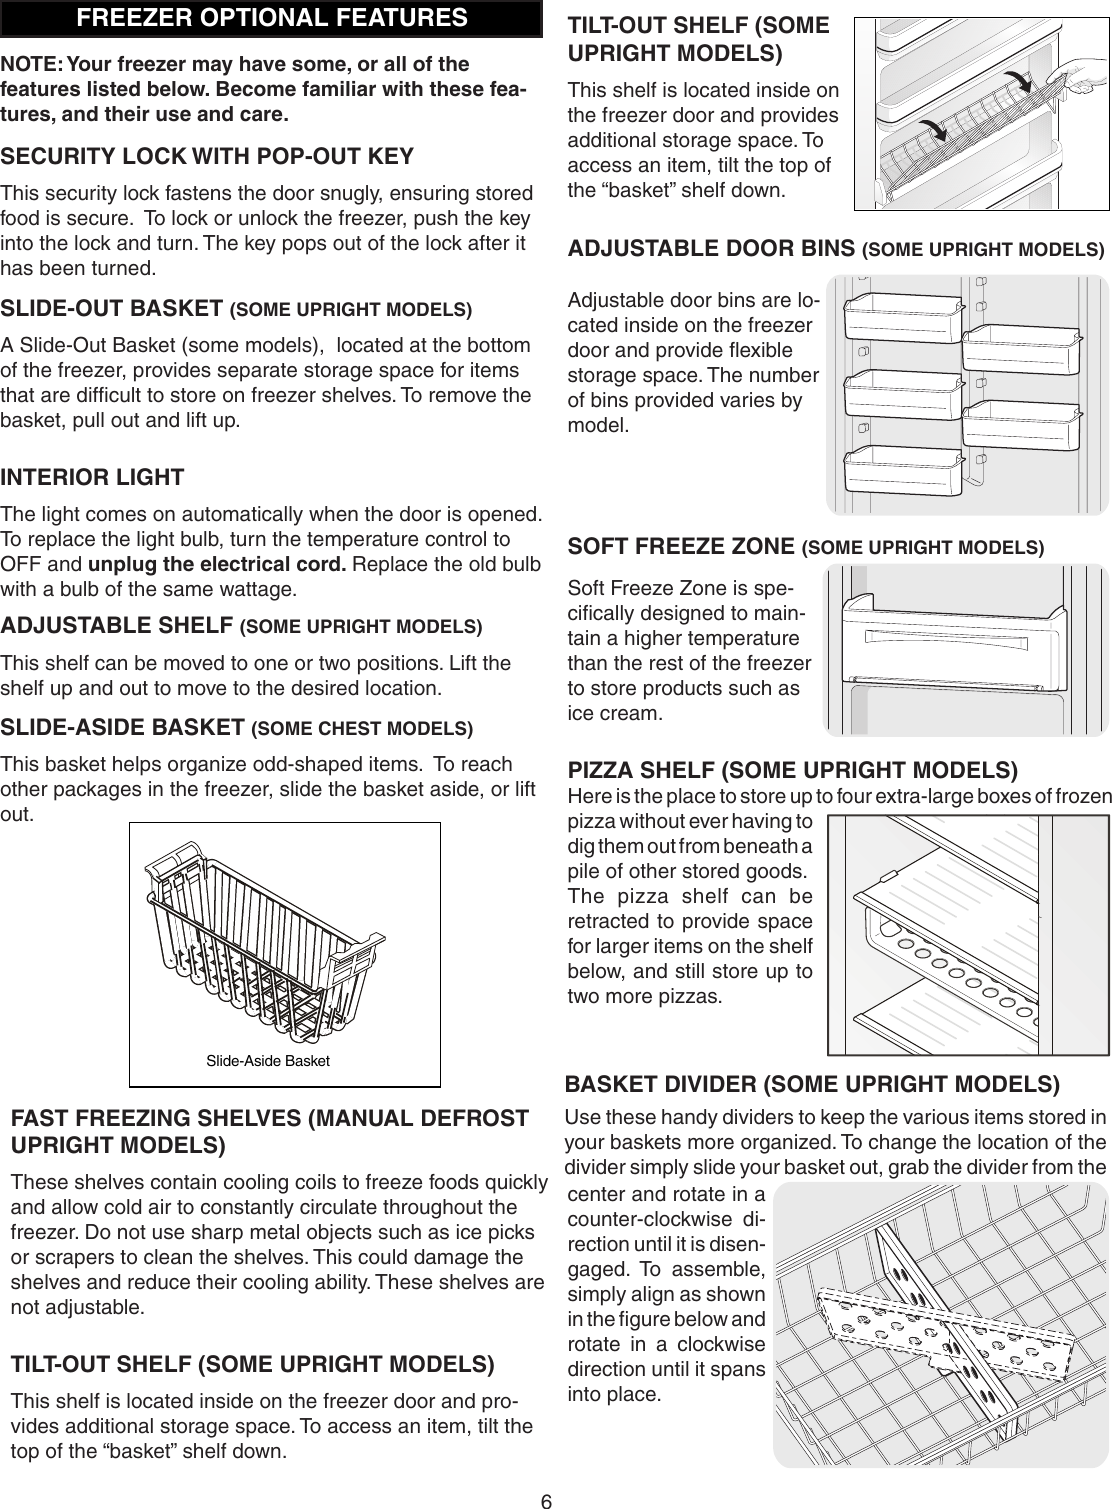 Page 6 of 11 - Crosley Crosley-Defrost--Owner-S-Manual